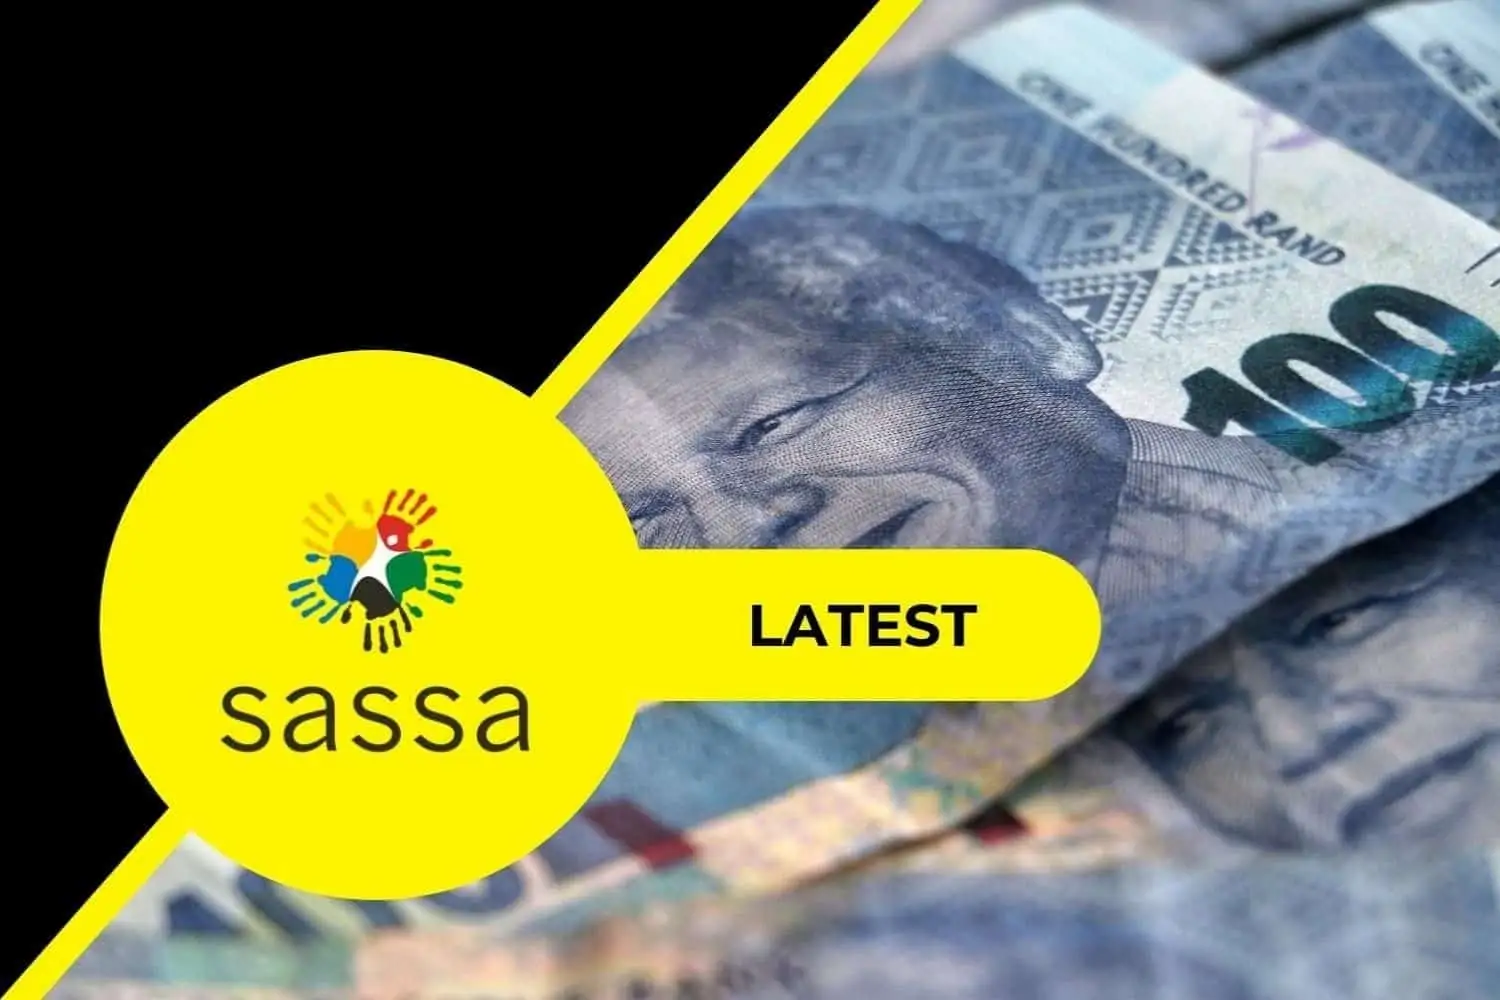 SASSA once again targeted for Fake News. Image: AdobeStock